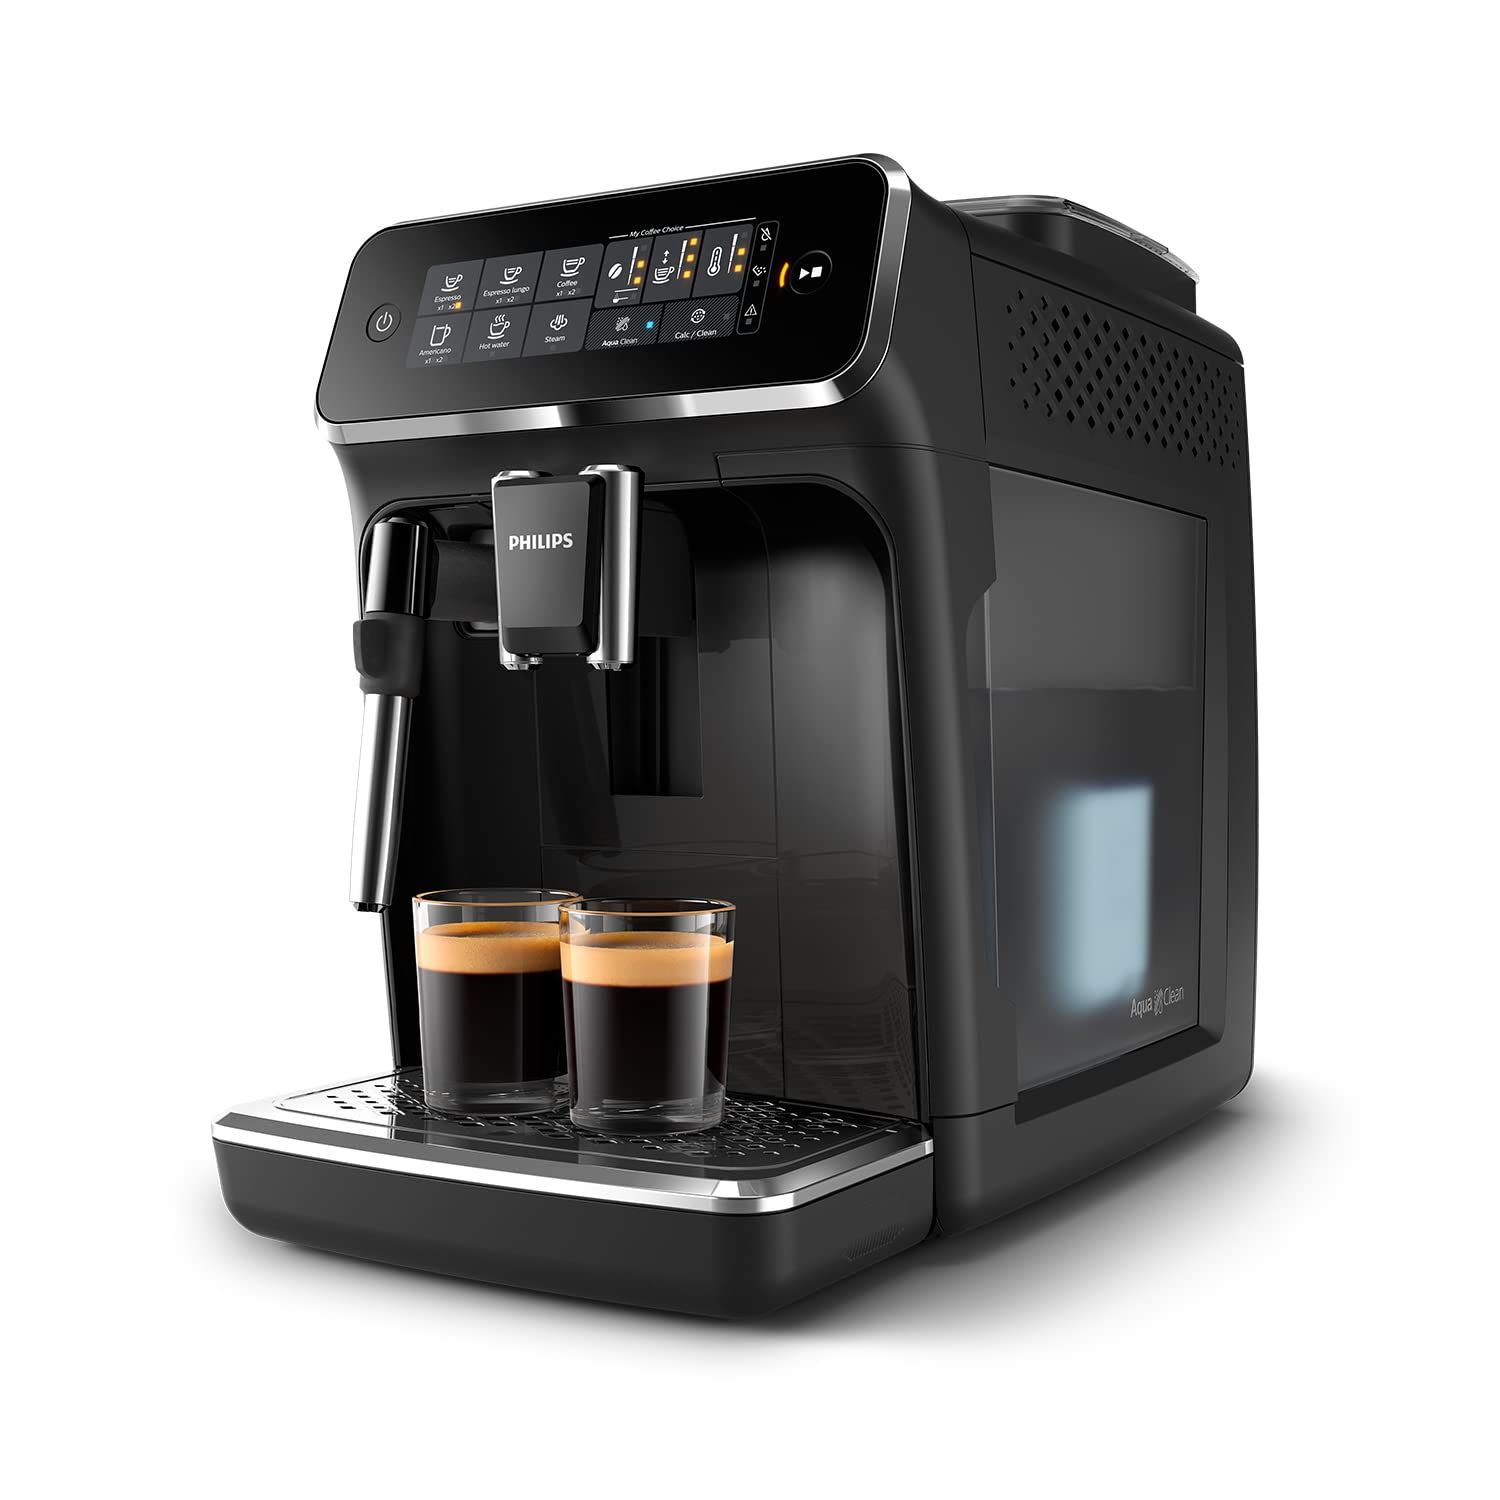 Philips 3200 Series Fully Automatic Espresso Machine w/ Milk Frother, Black, EP3221/44 | Amazon (US)